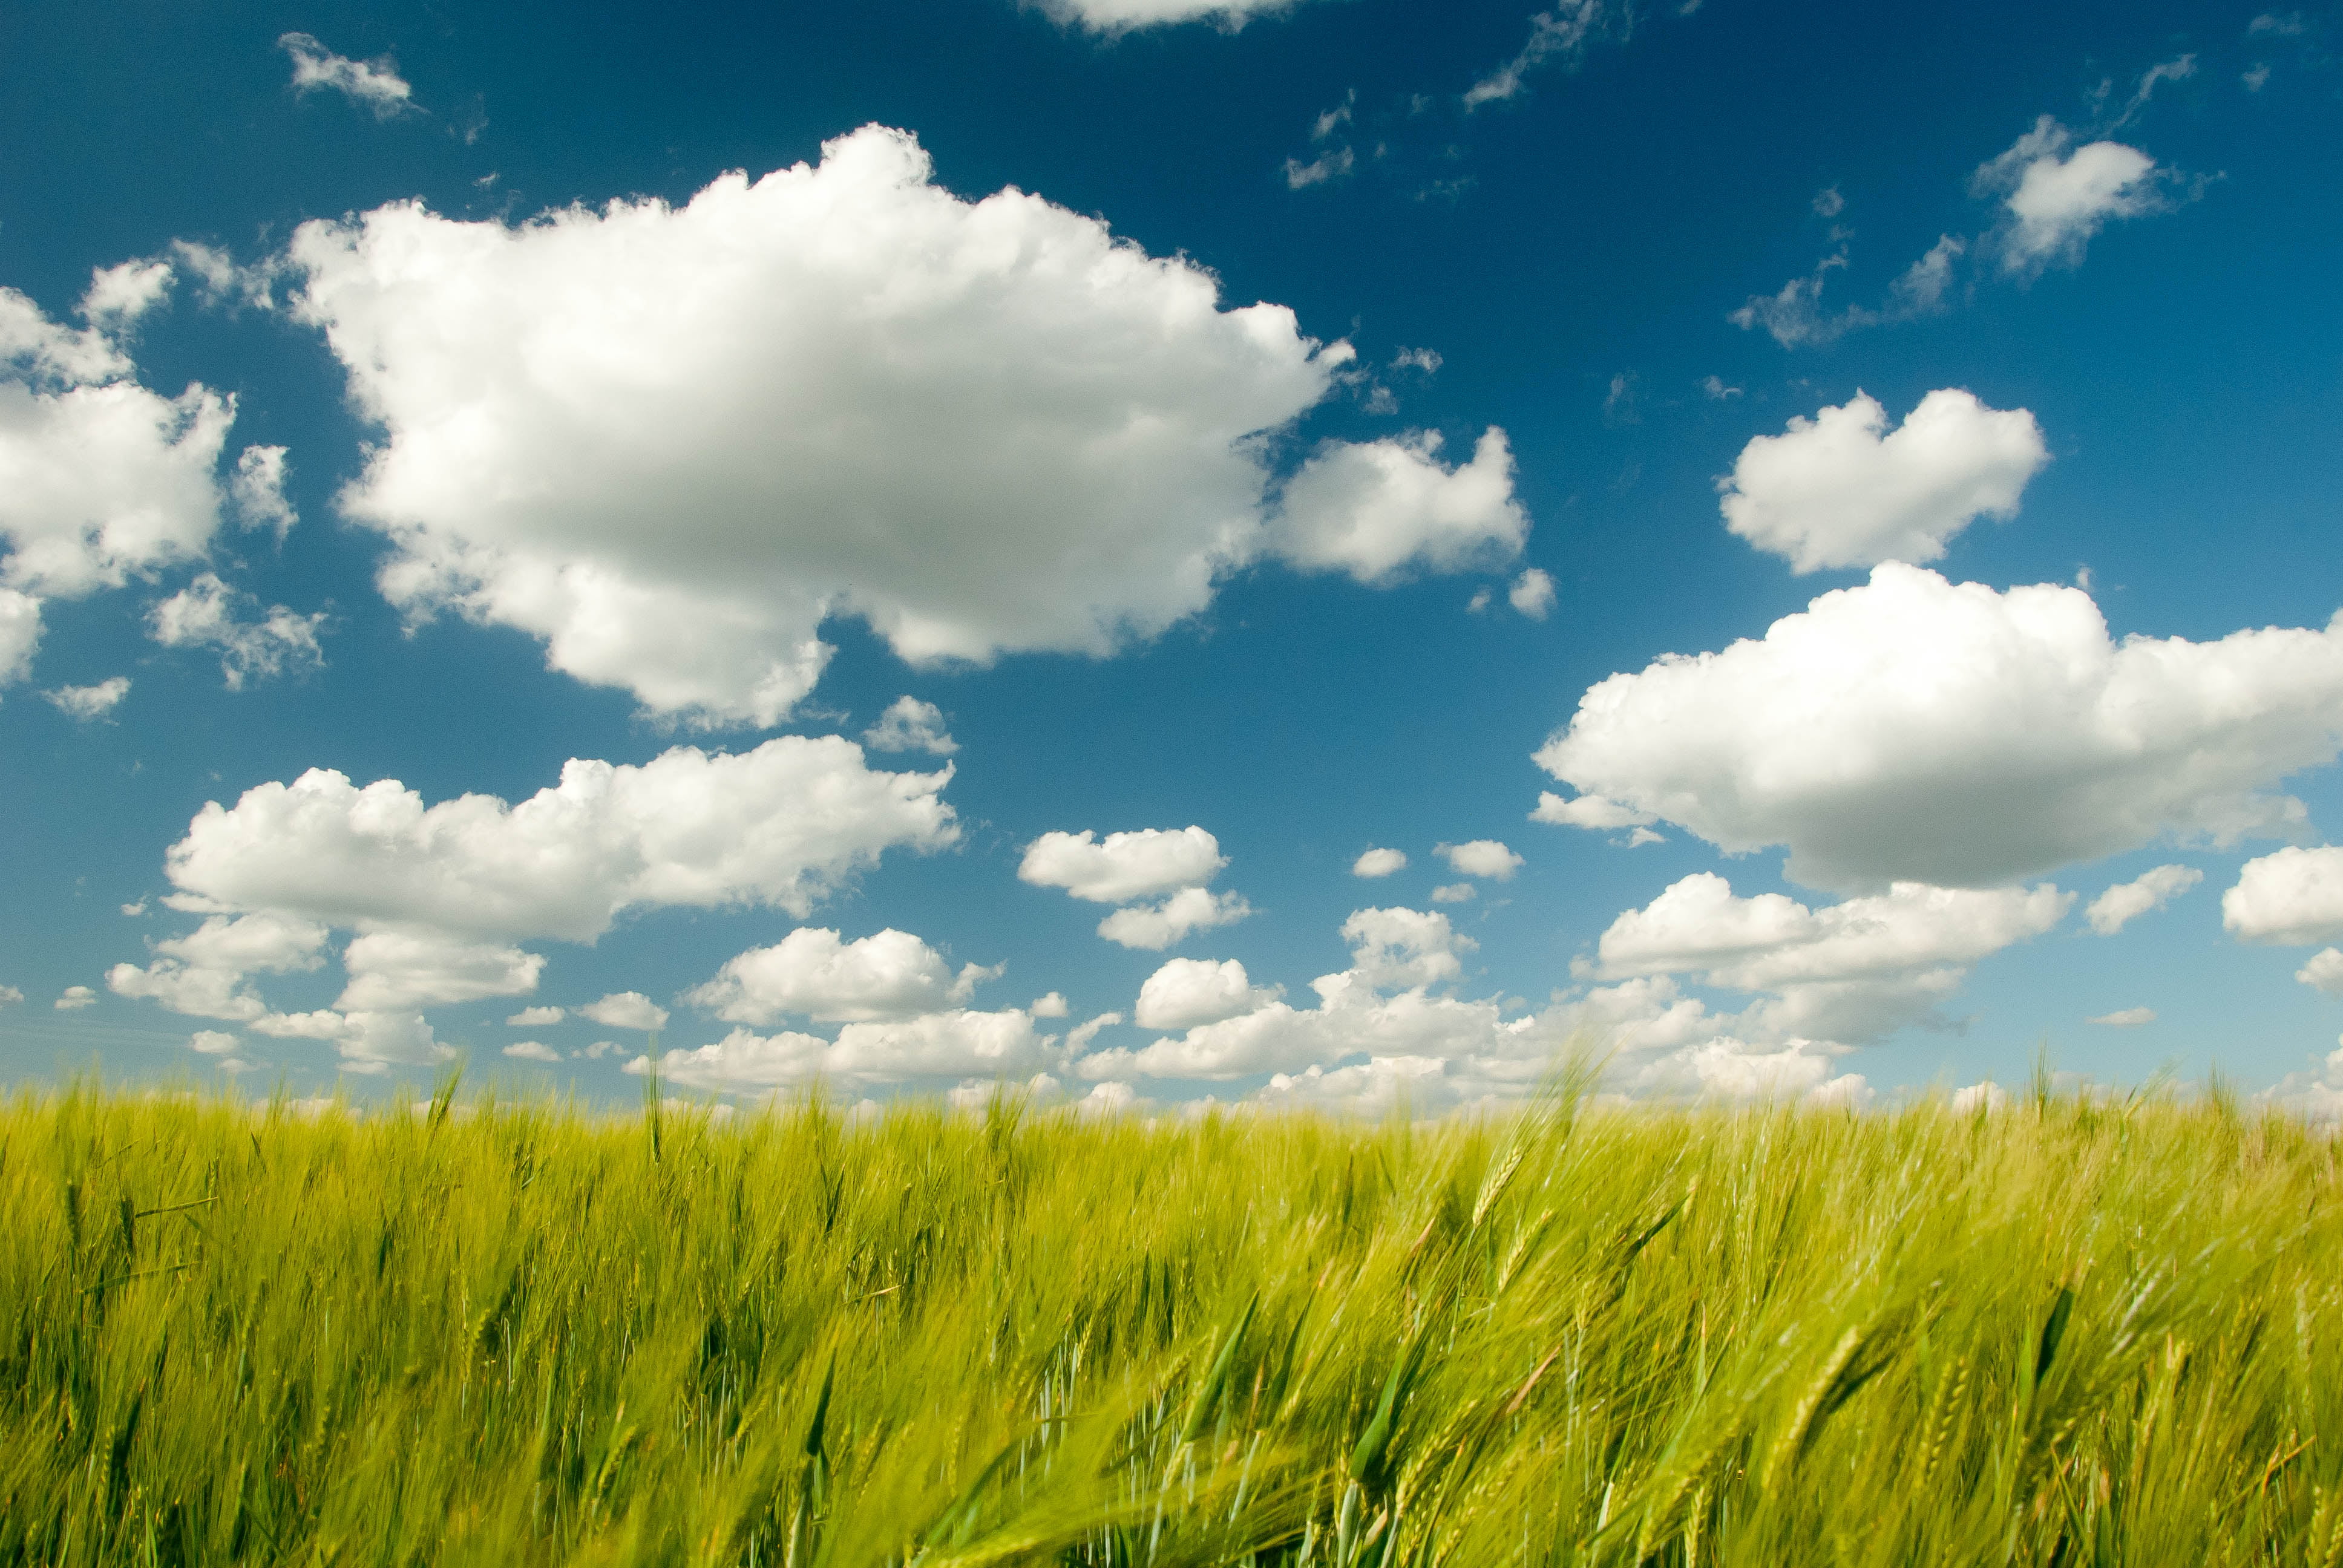 green grass field and cloud illustration, Clouds, nature, summer